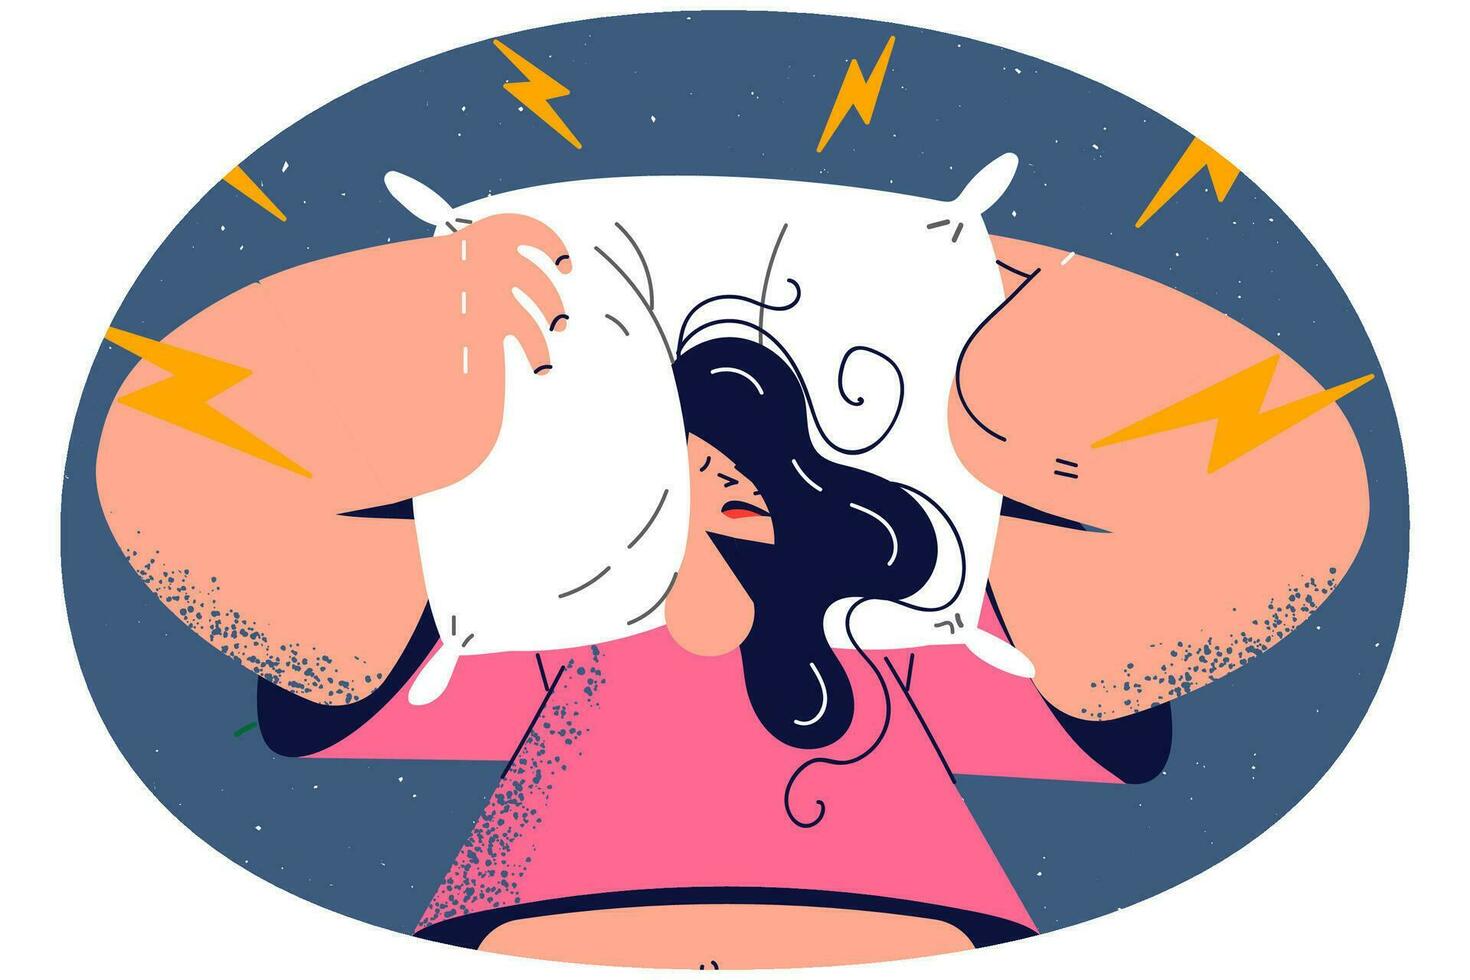 Stressed woman cover ears with pillow suffer from noise. Upset unhappy female bothered annoyed with loud noises. Vector illustration.